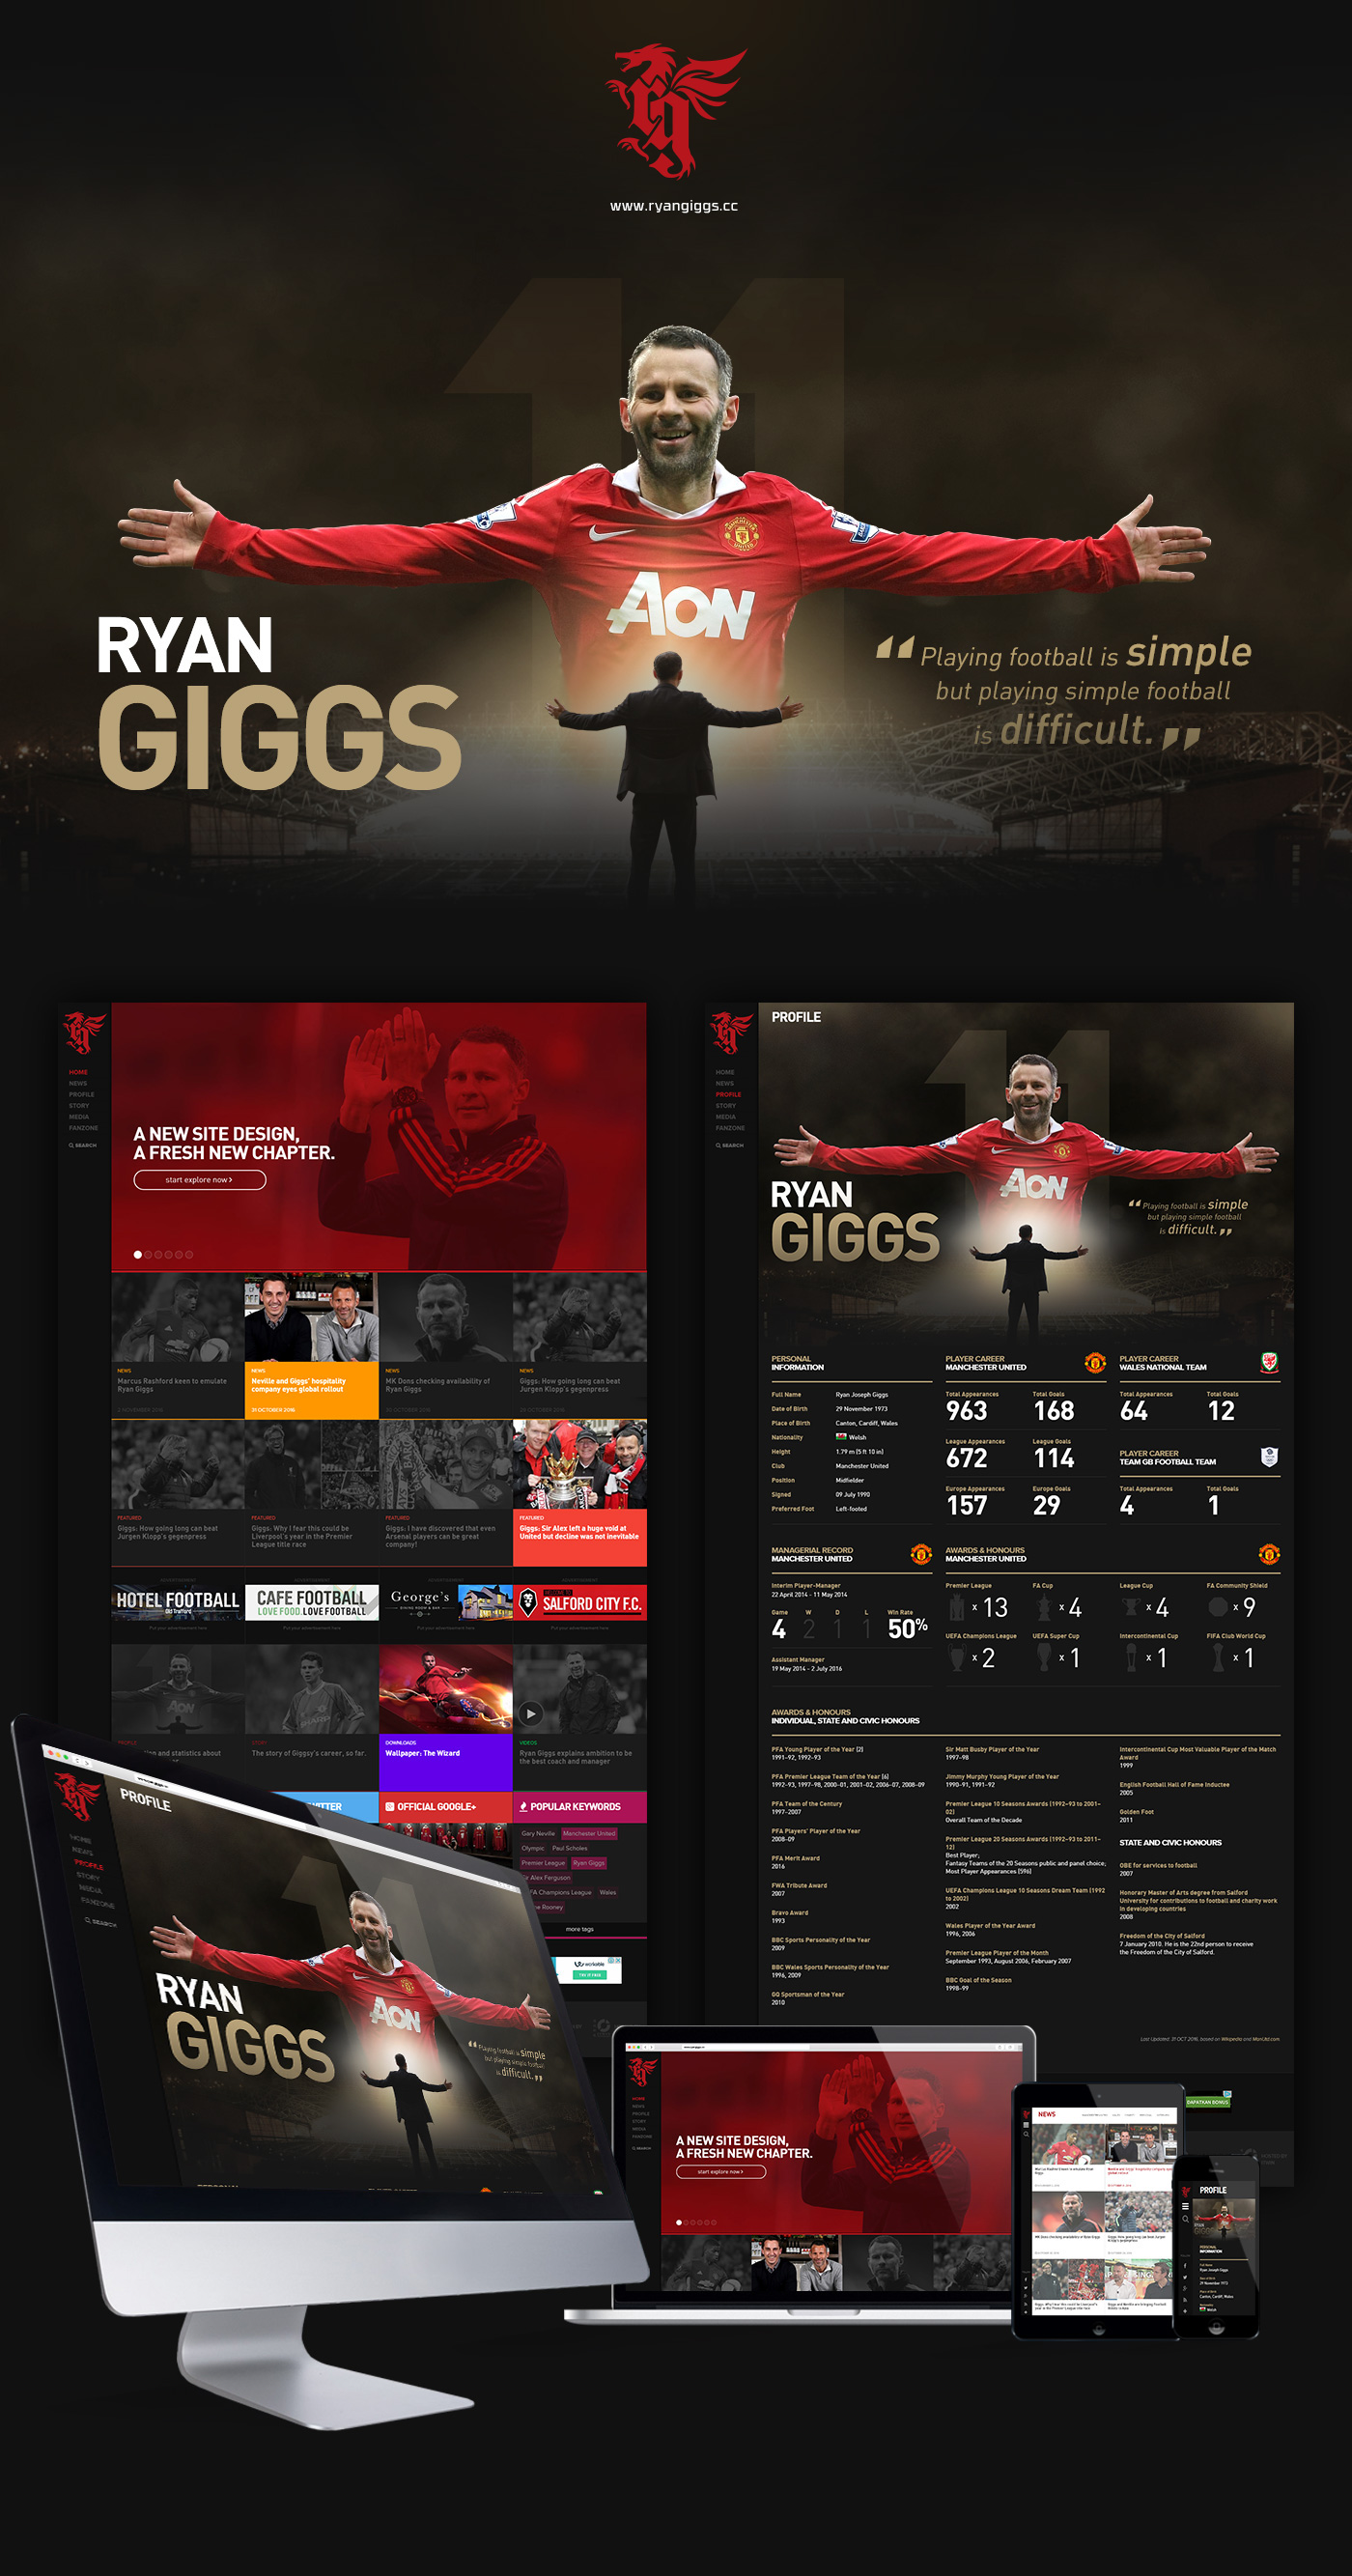 Ryan Giggs giggs football soccer Manchester United athlete sport wales Web Design  MUFC